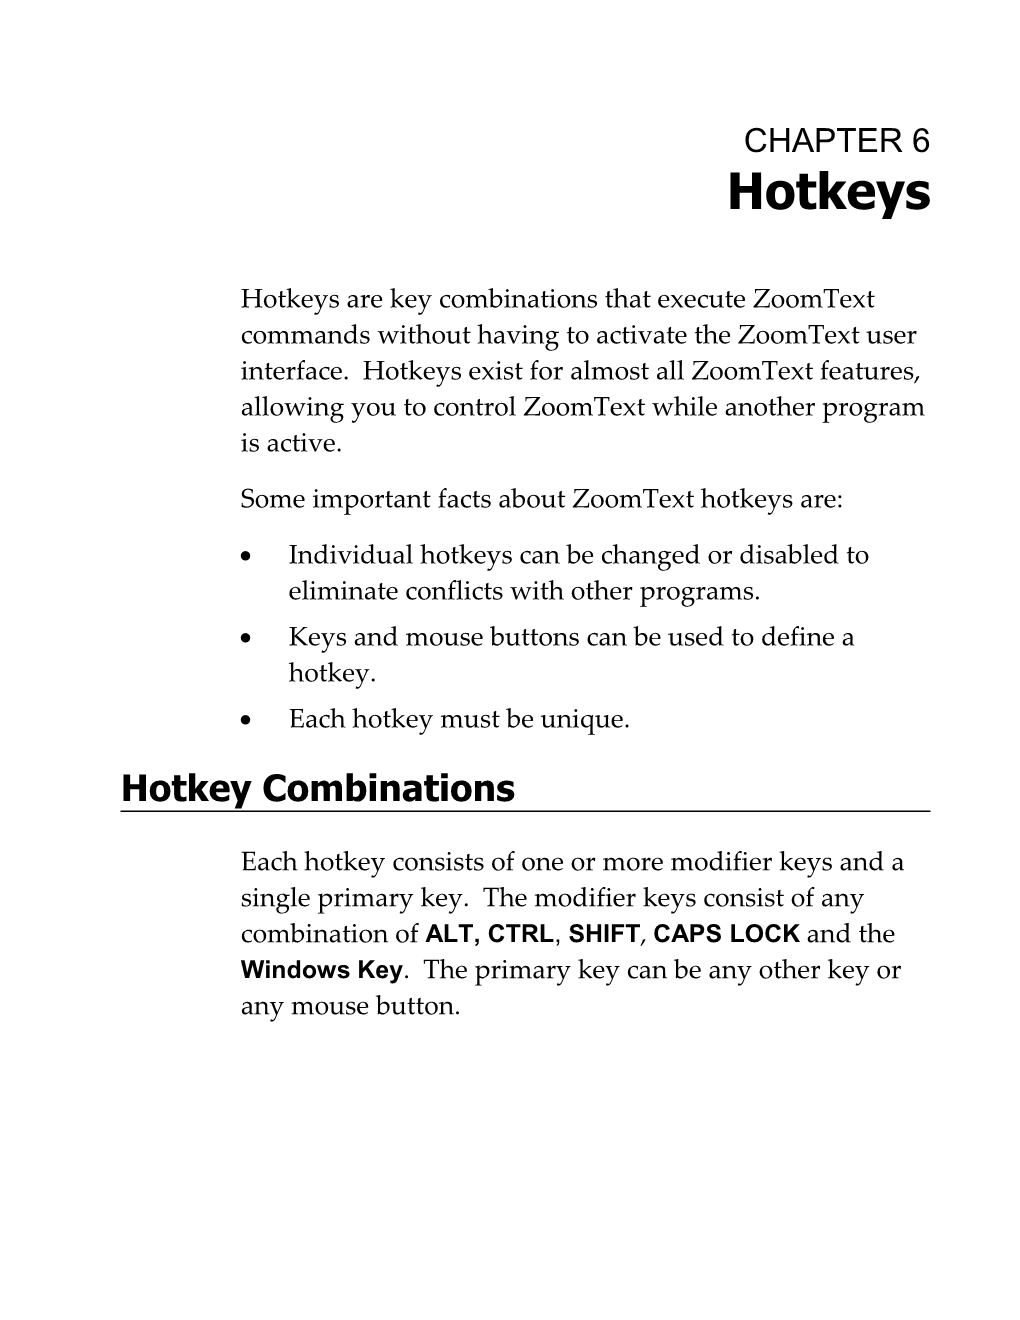 Some Important Facts About Zoomtext Hotkeys Are